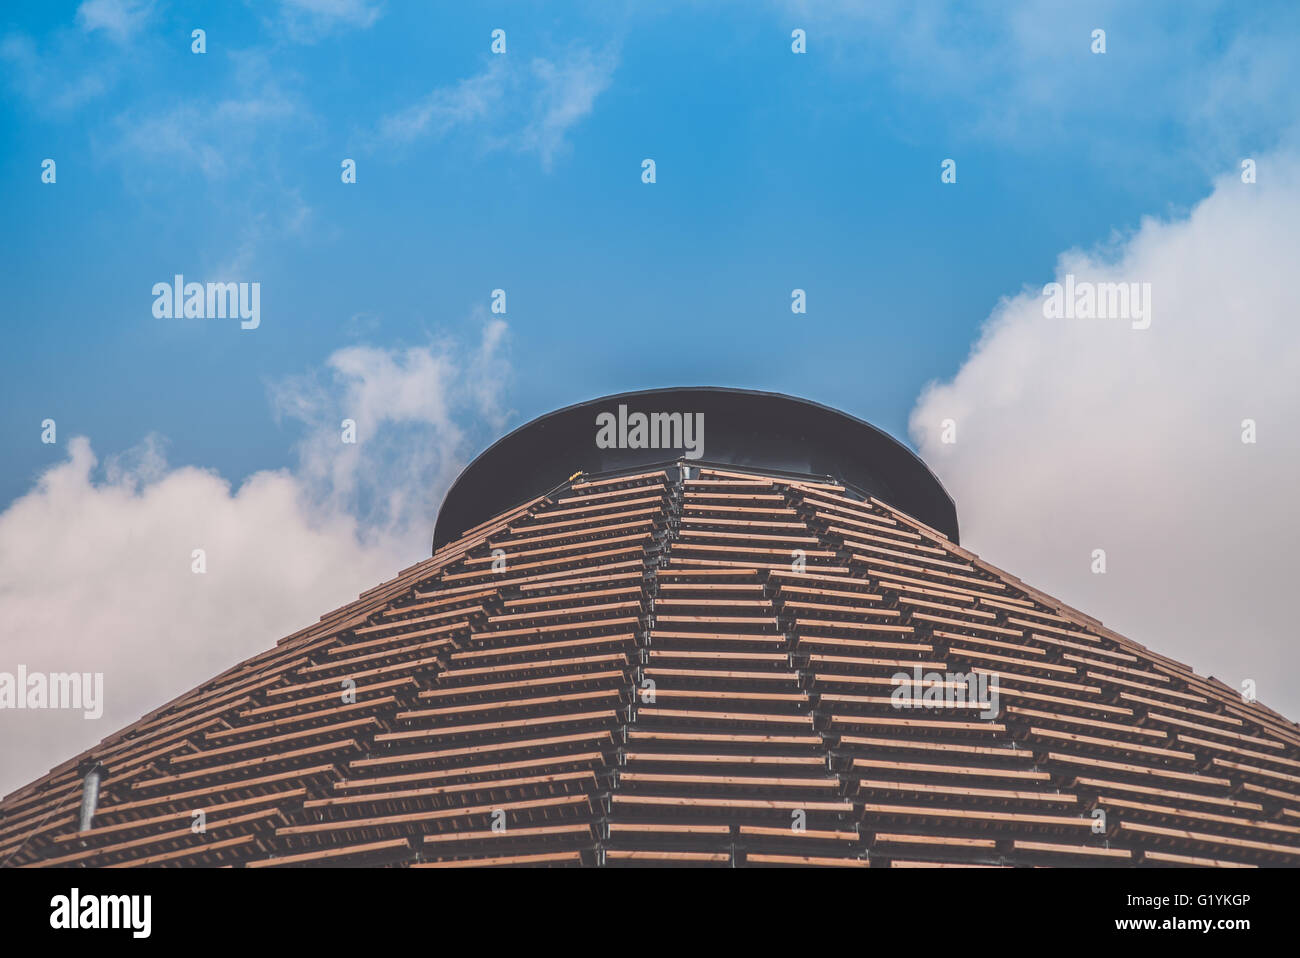 Strange pyramid and clouds Stock Photo